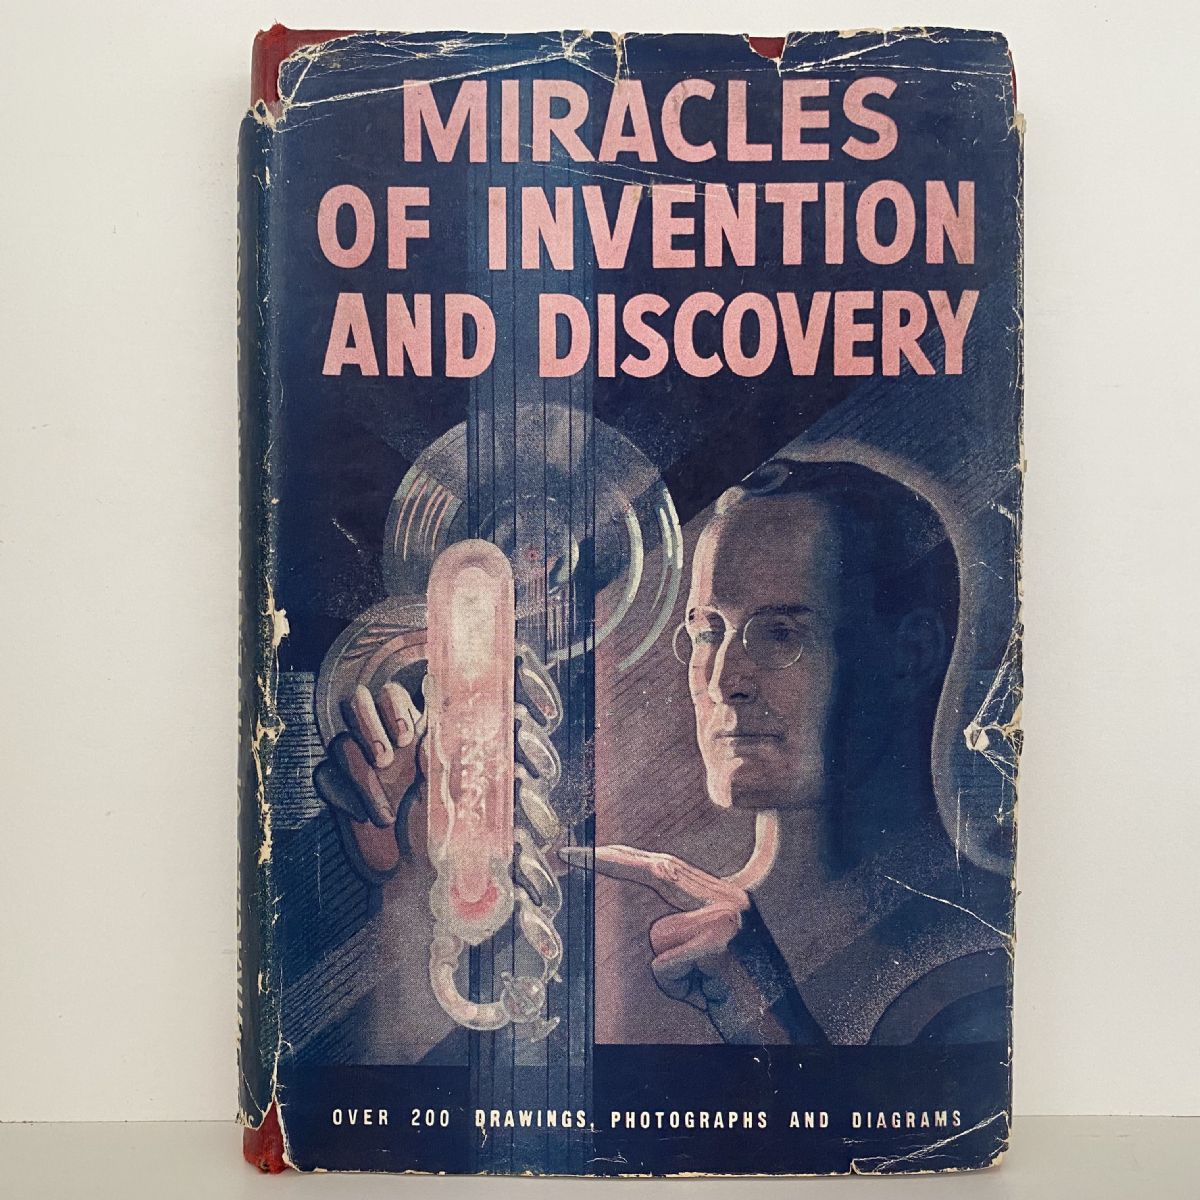 MIRACLES OF INVENTION AND DISCOVERY